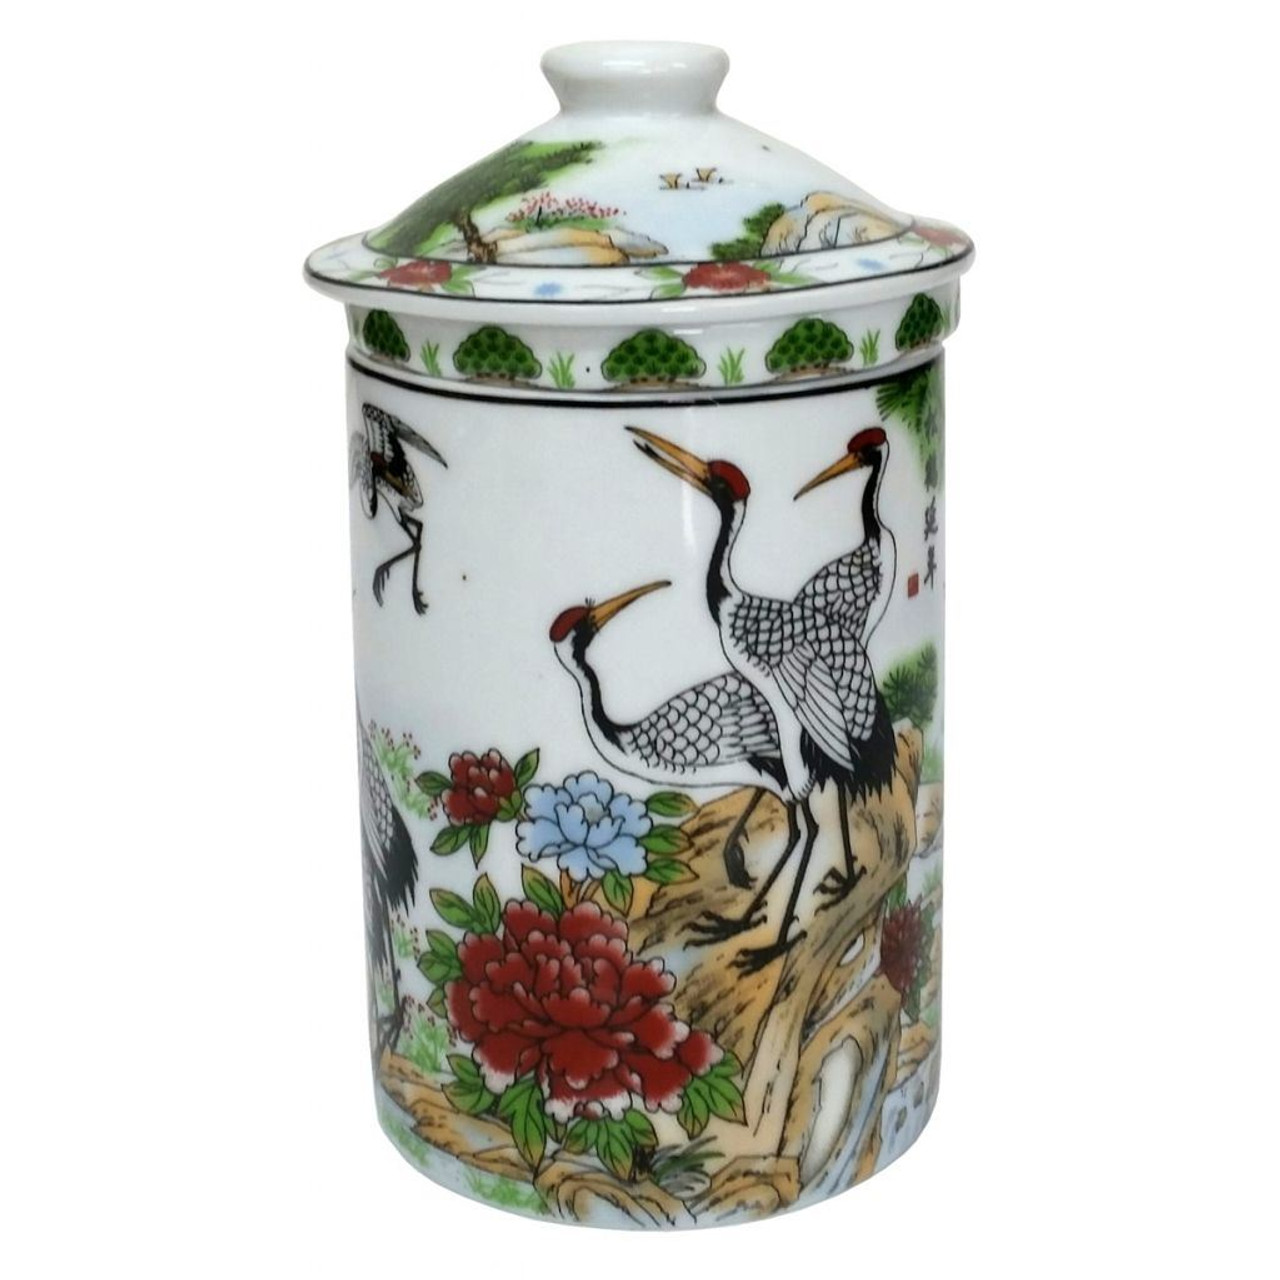 Porcelain Chinese Tea Mug with Infuser and Lid - Dancing Cranes Pattern